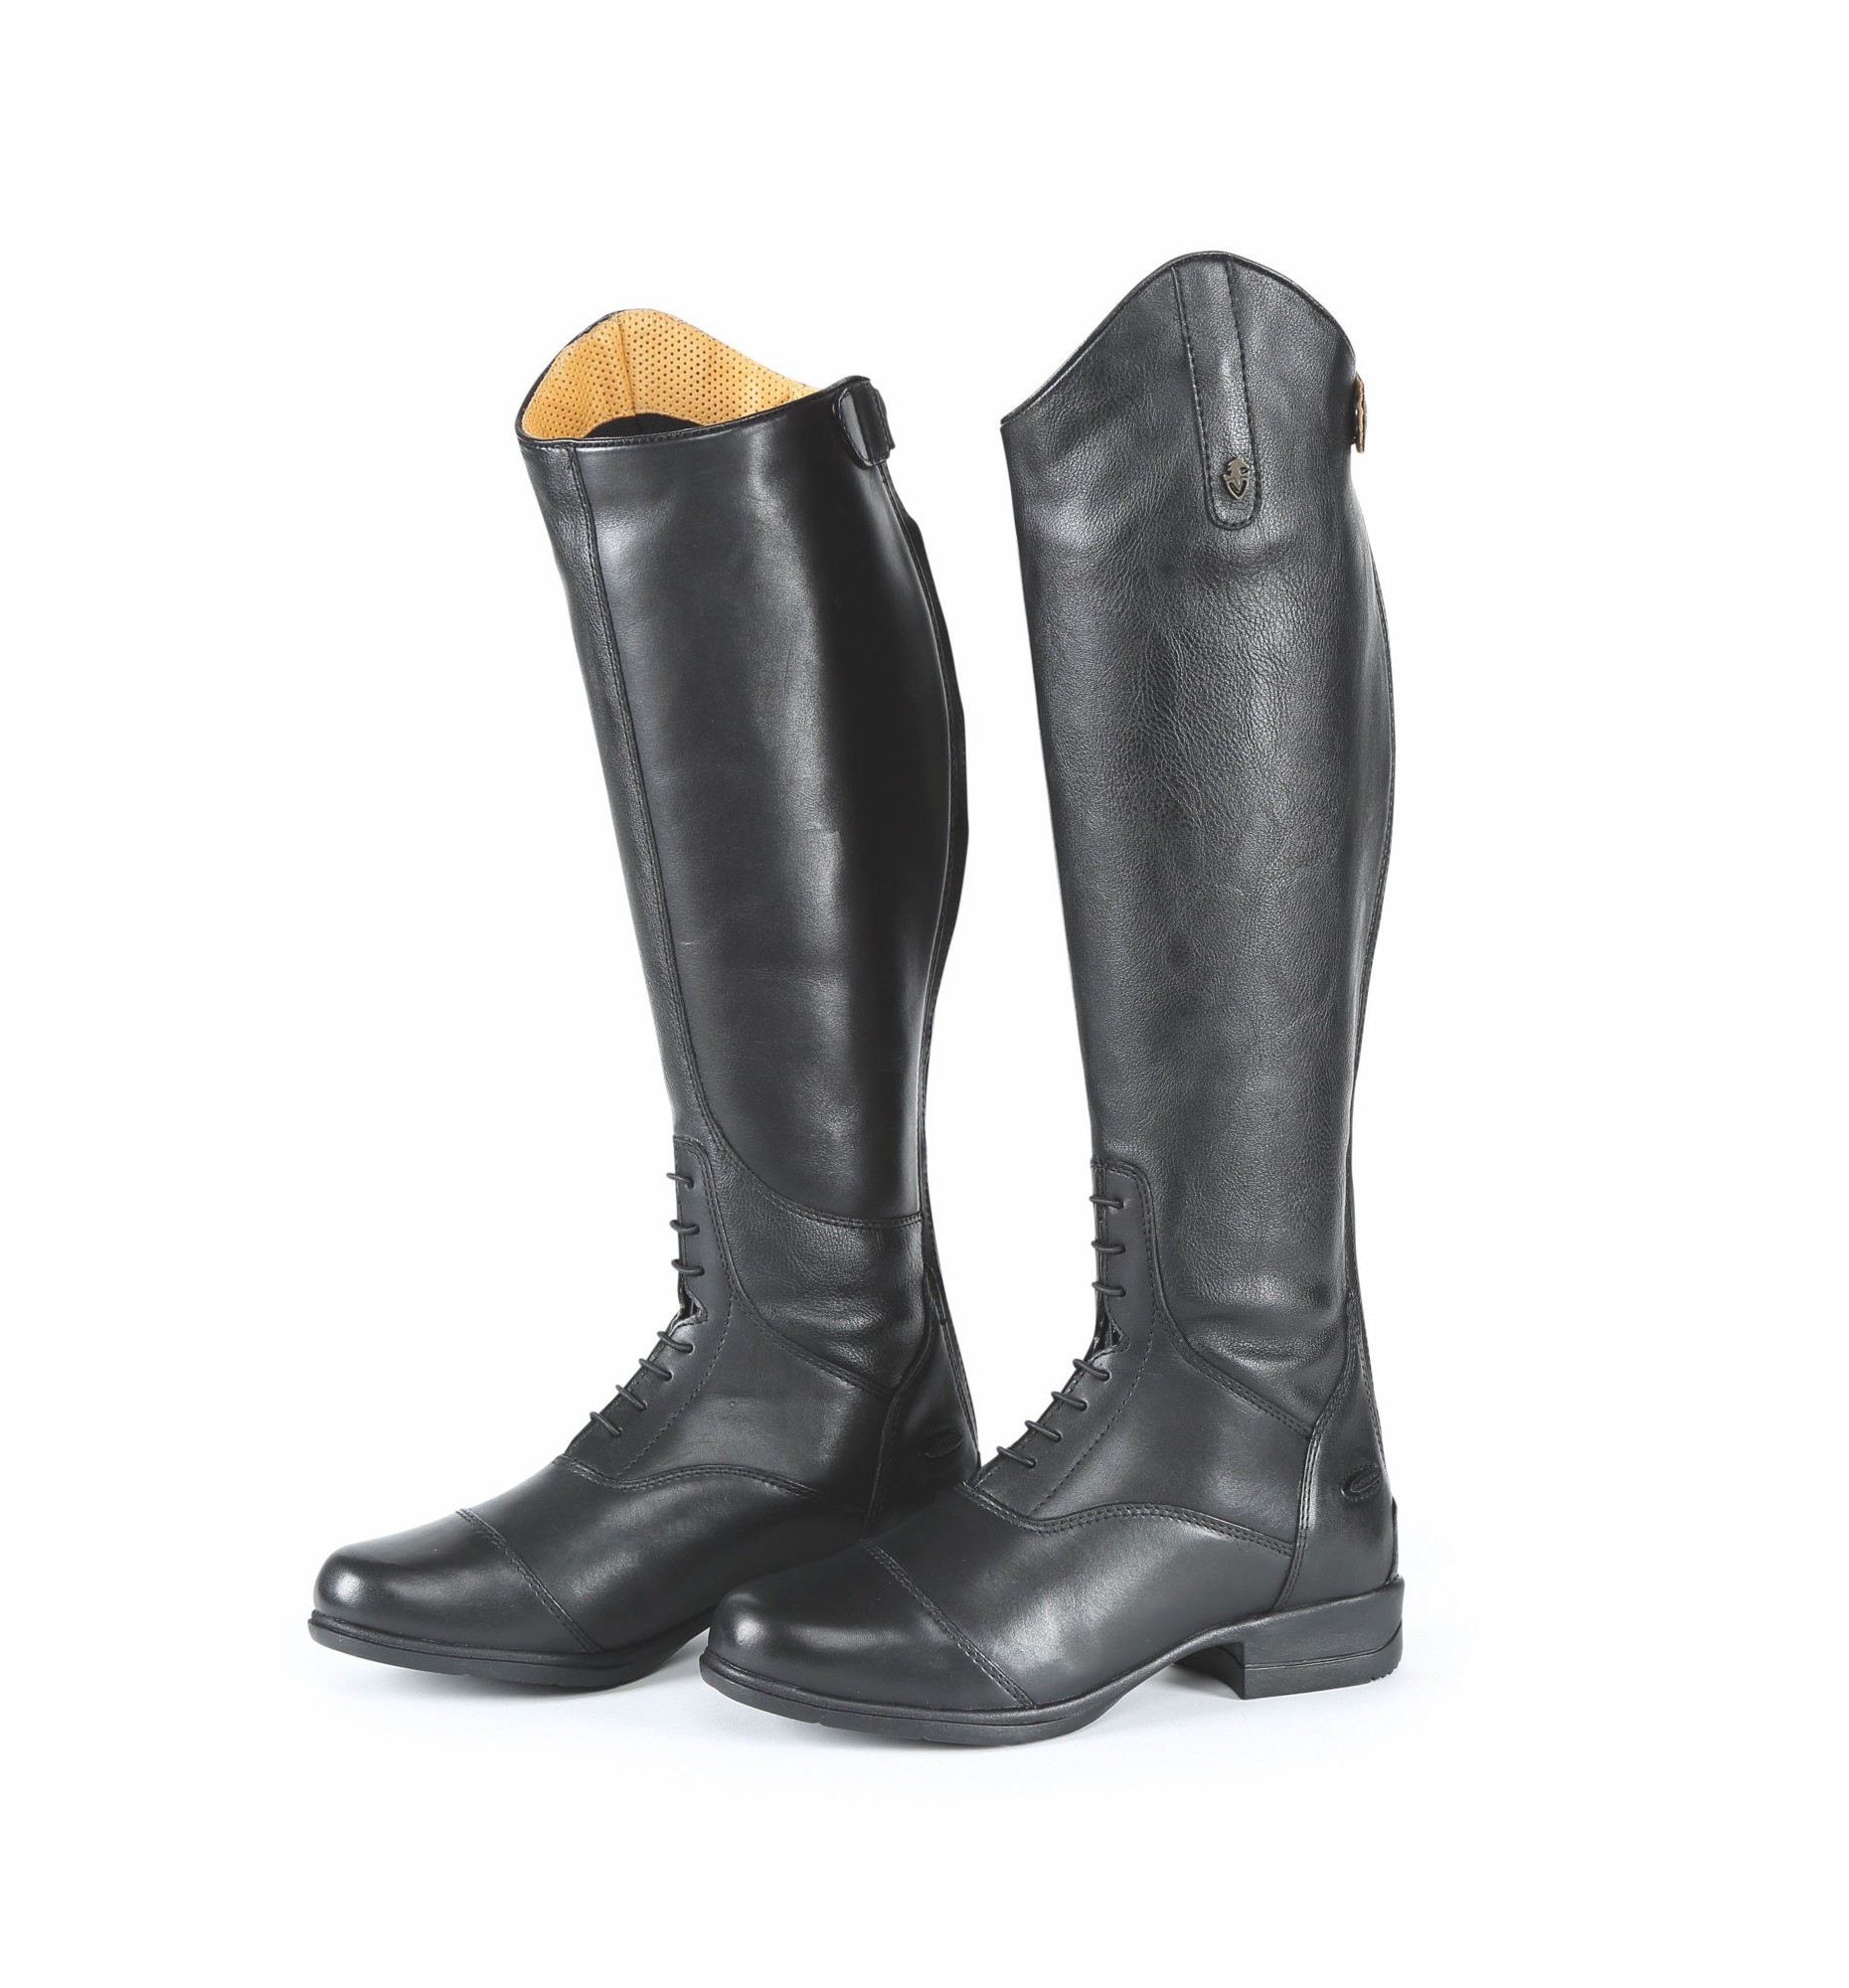 Shires Moretta Gianna Junior Riding Boots - Townfields Saddlers